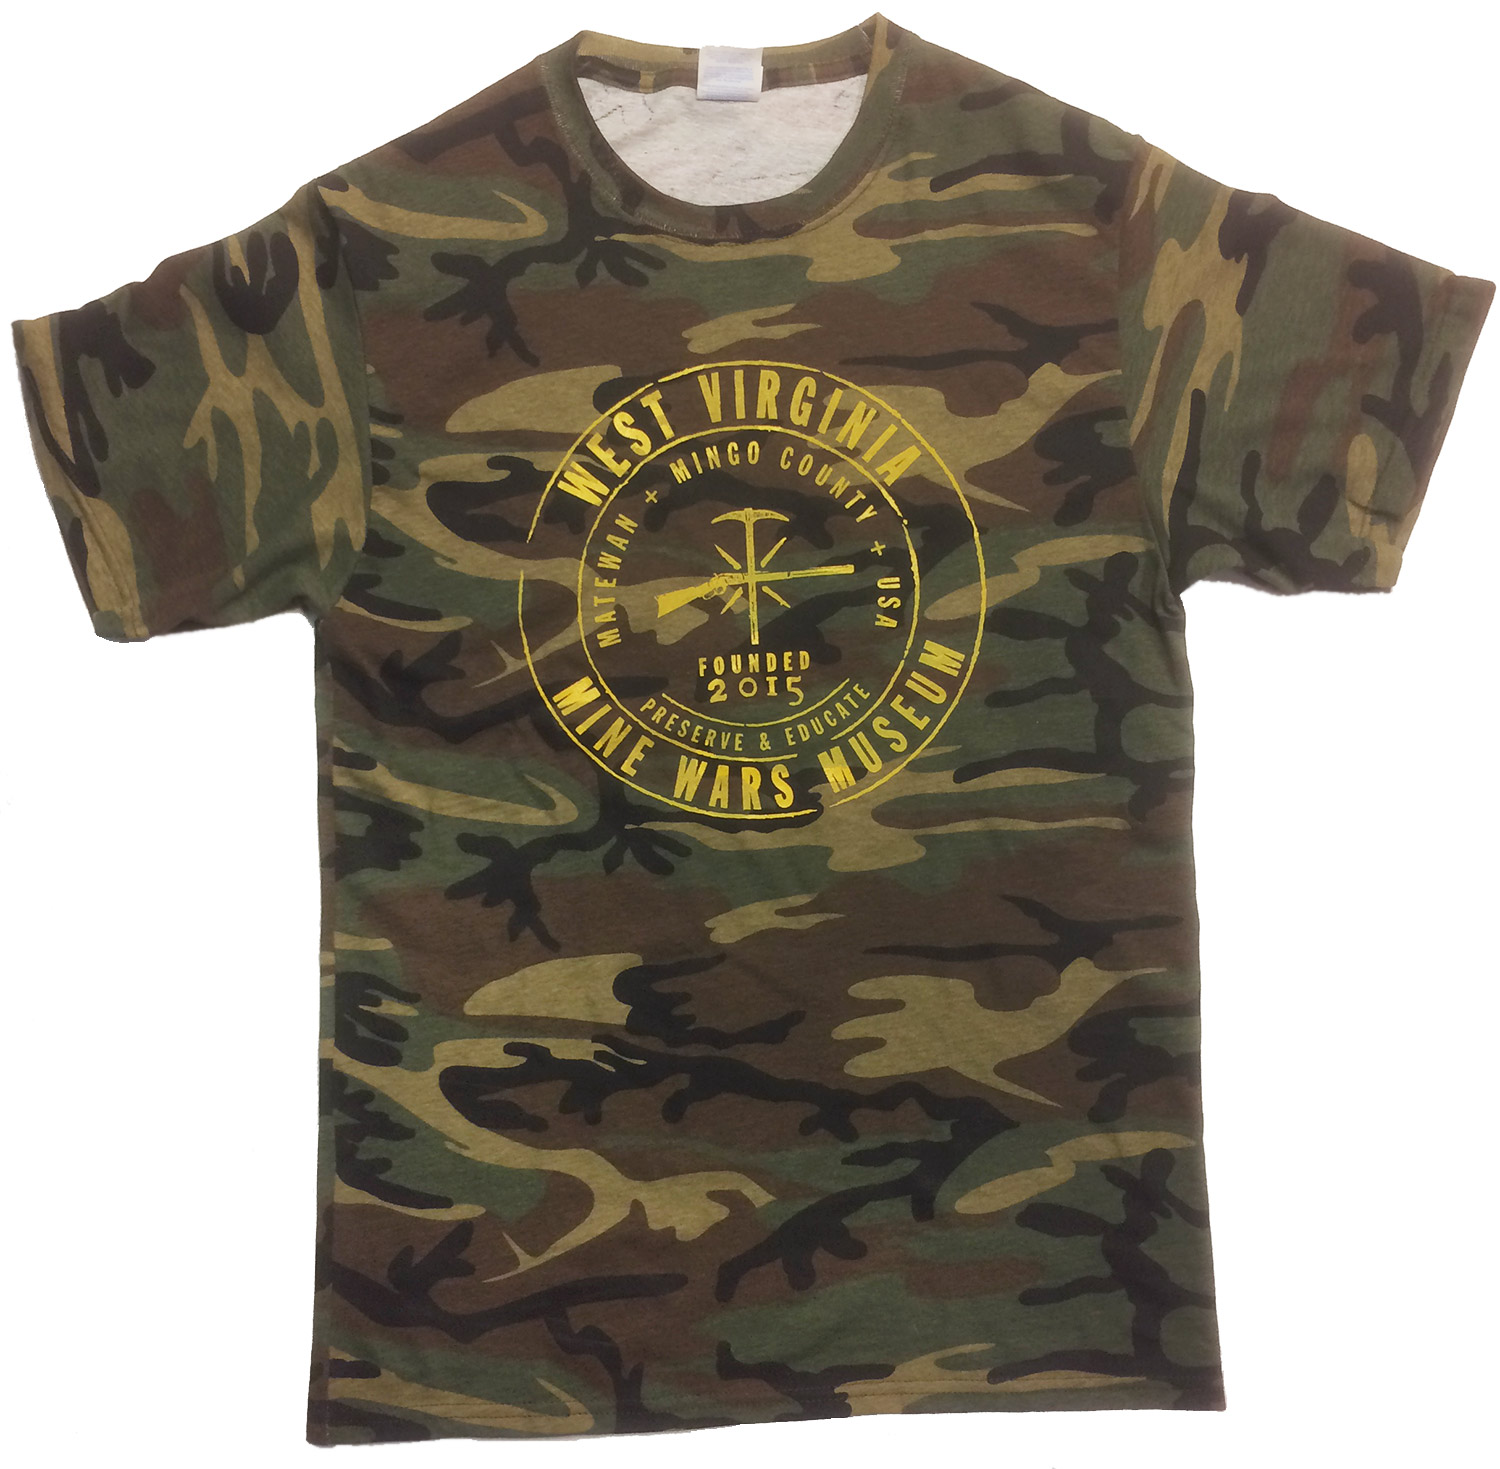 Museum T-Shirt in Union Camouflage — West Virginia Mine Wars Museum